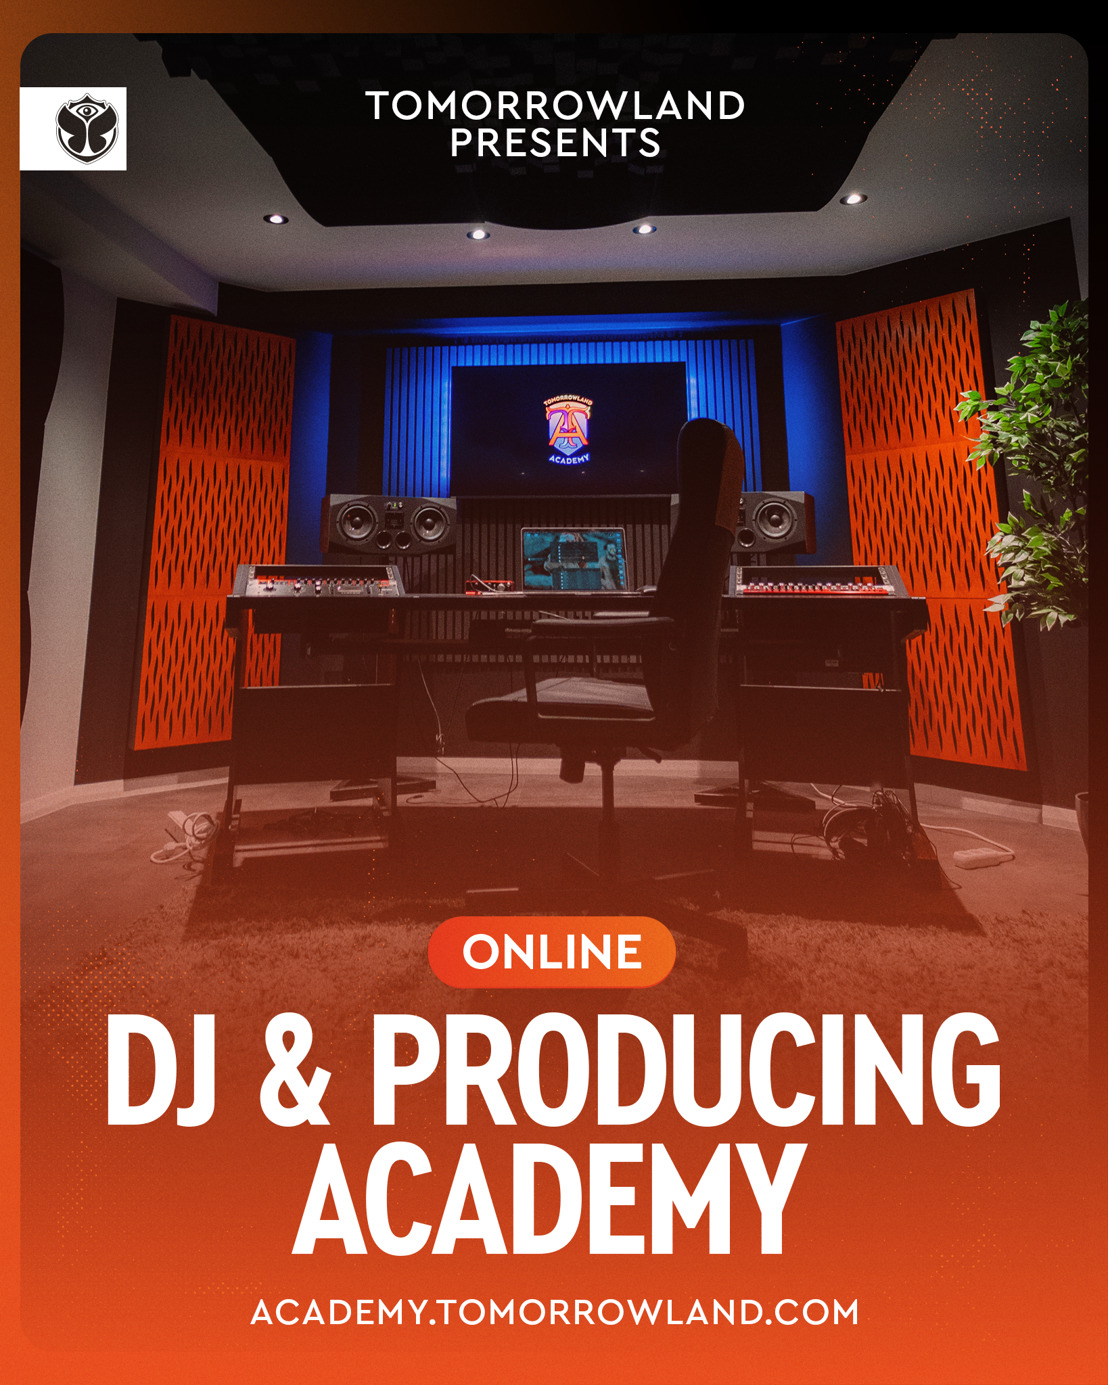 Tomorrowland launches the Online Tomorrowland DJ & Producing Academy